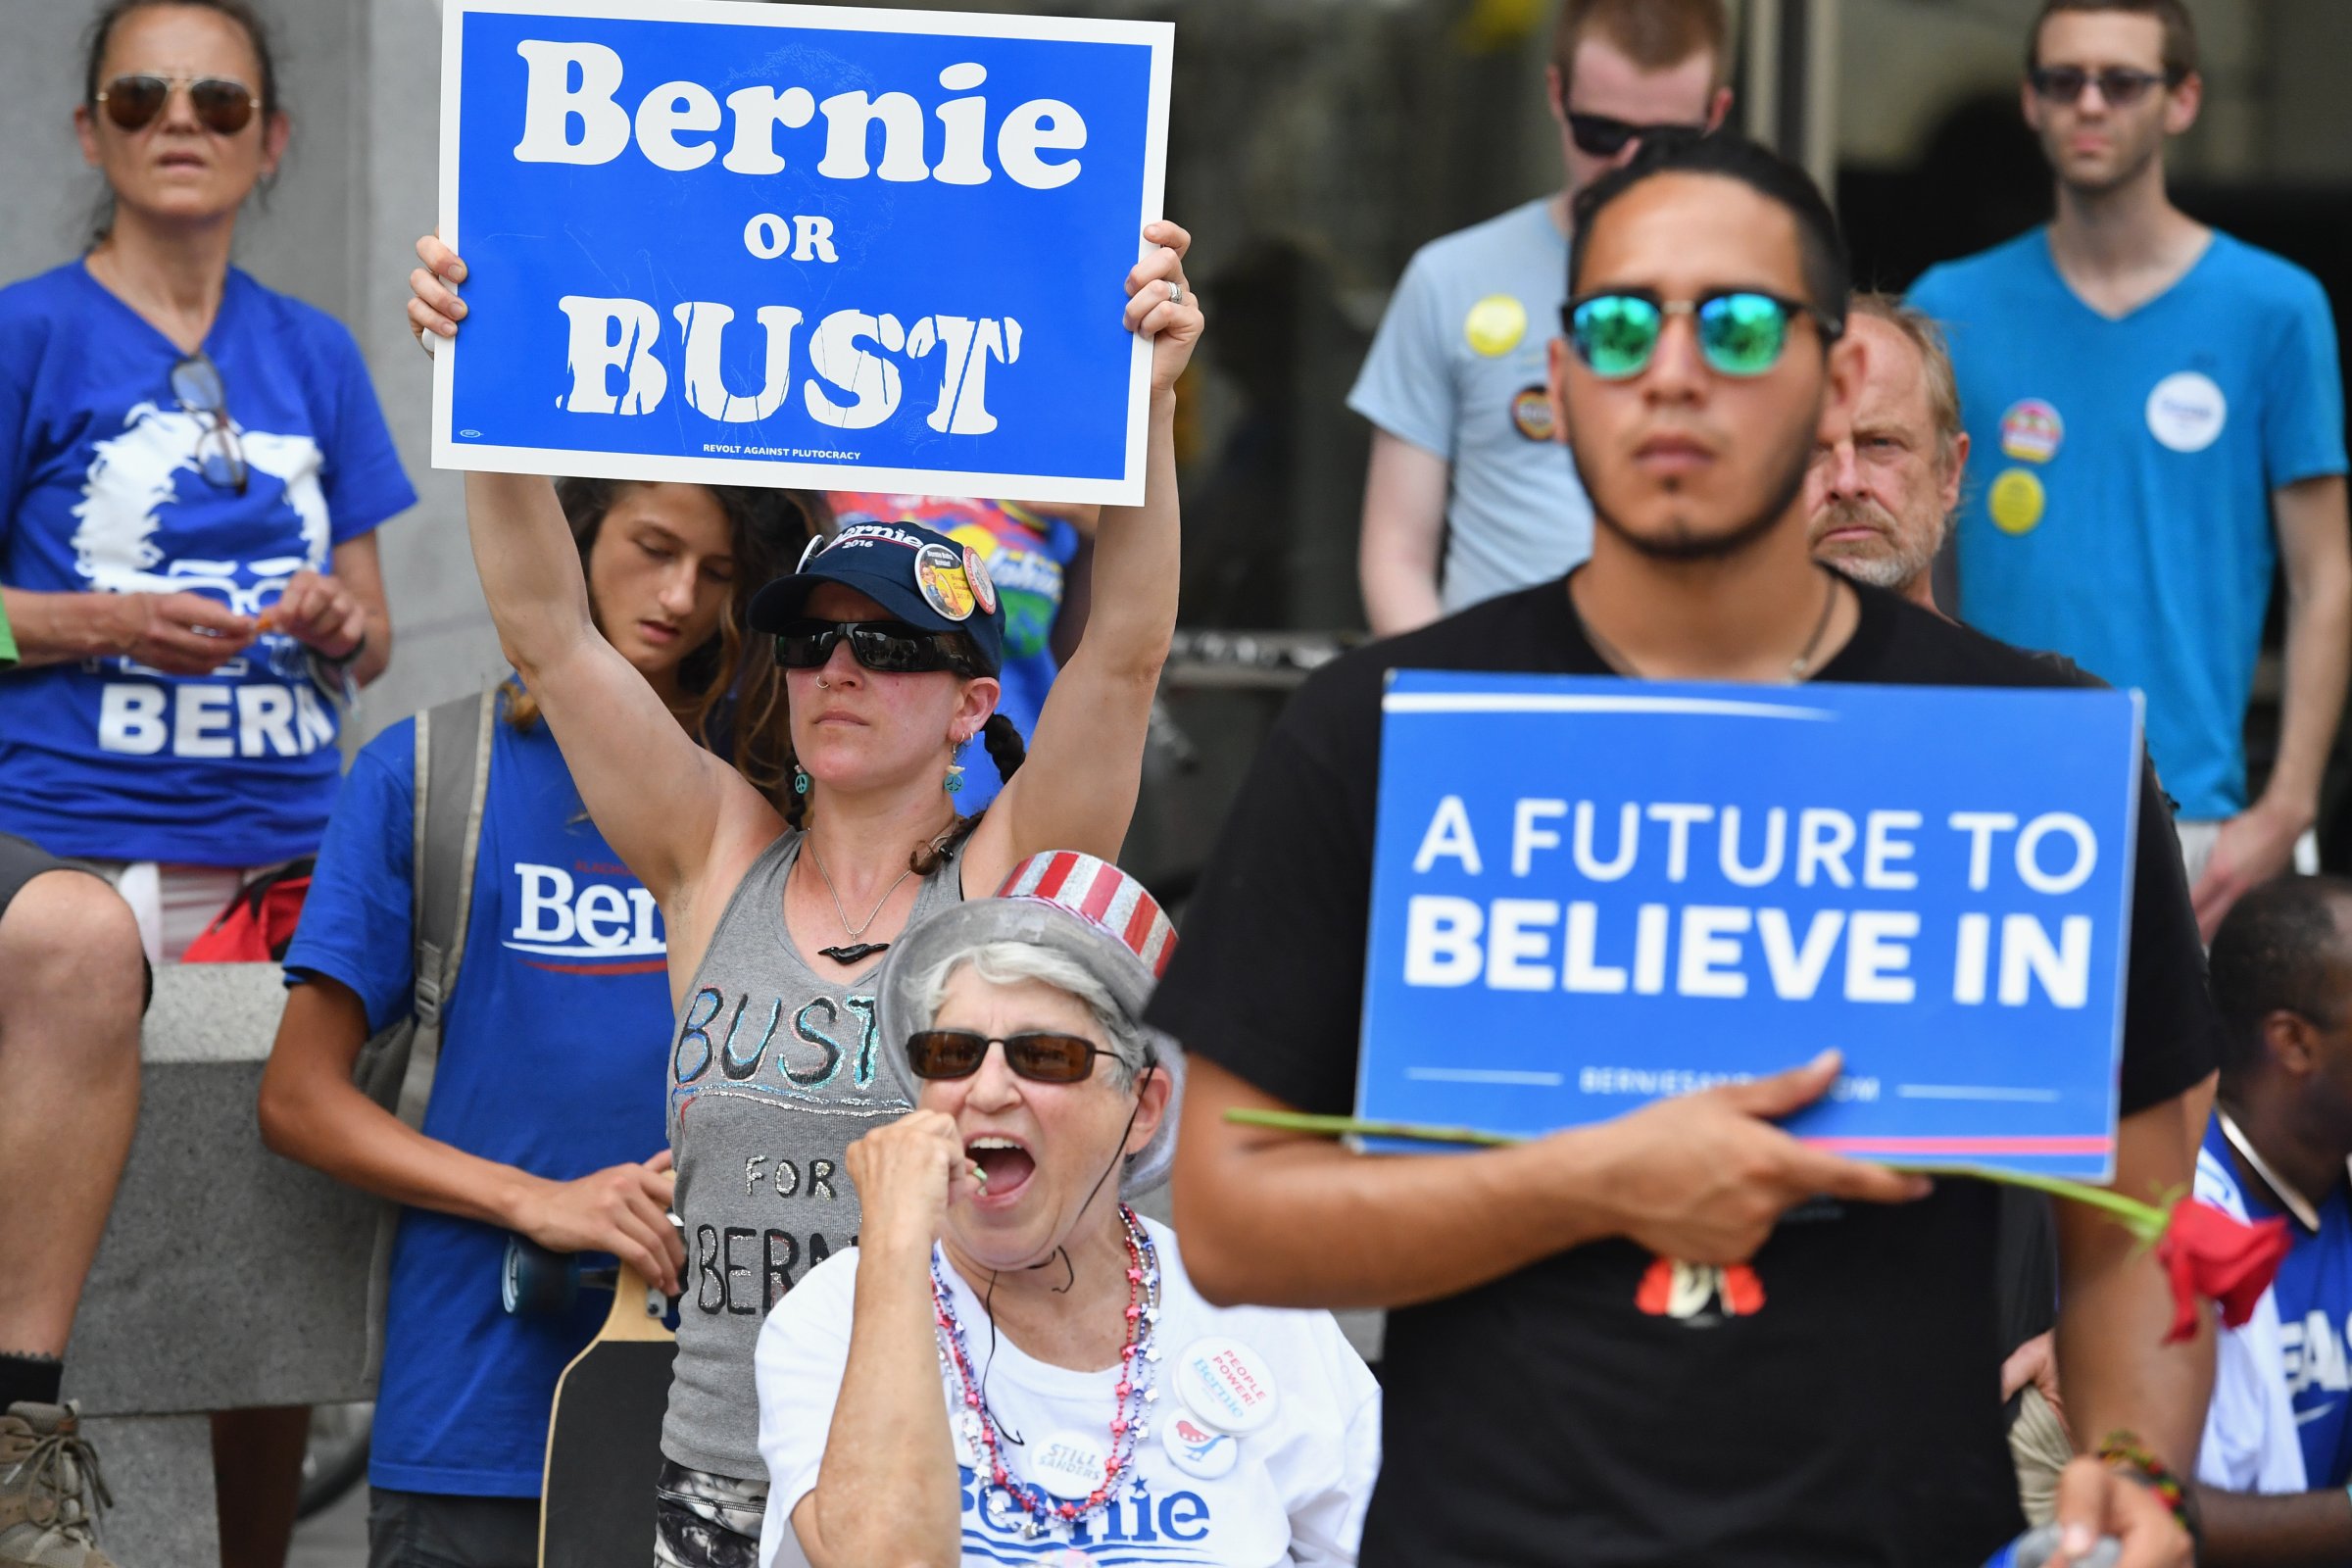 Bernie Sanders supporters gather at City Hall on the second day of the Democratic National Convention on July 26, 2016 in Philadelphia.